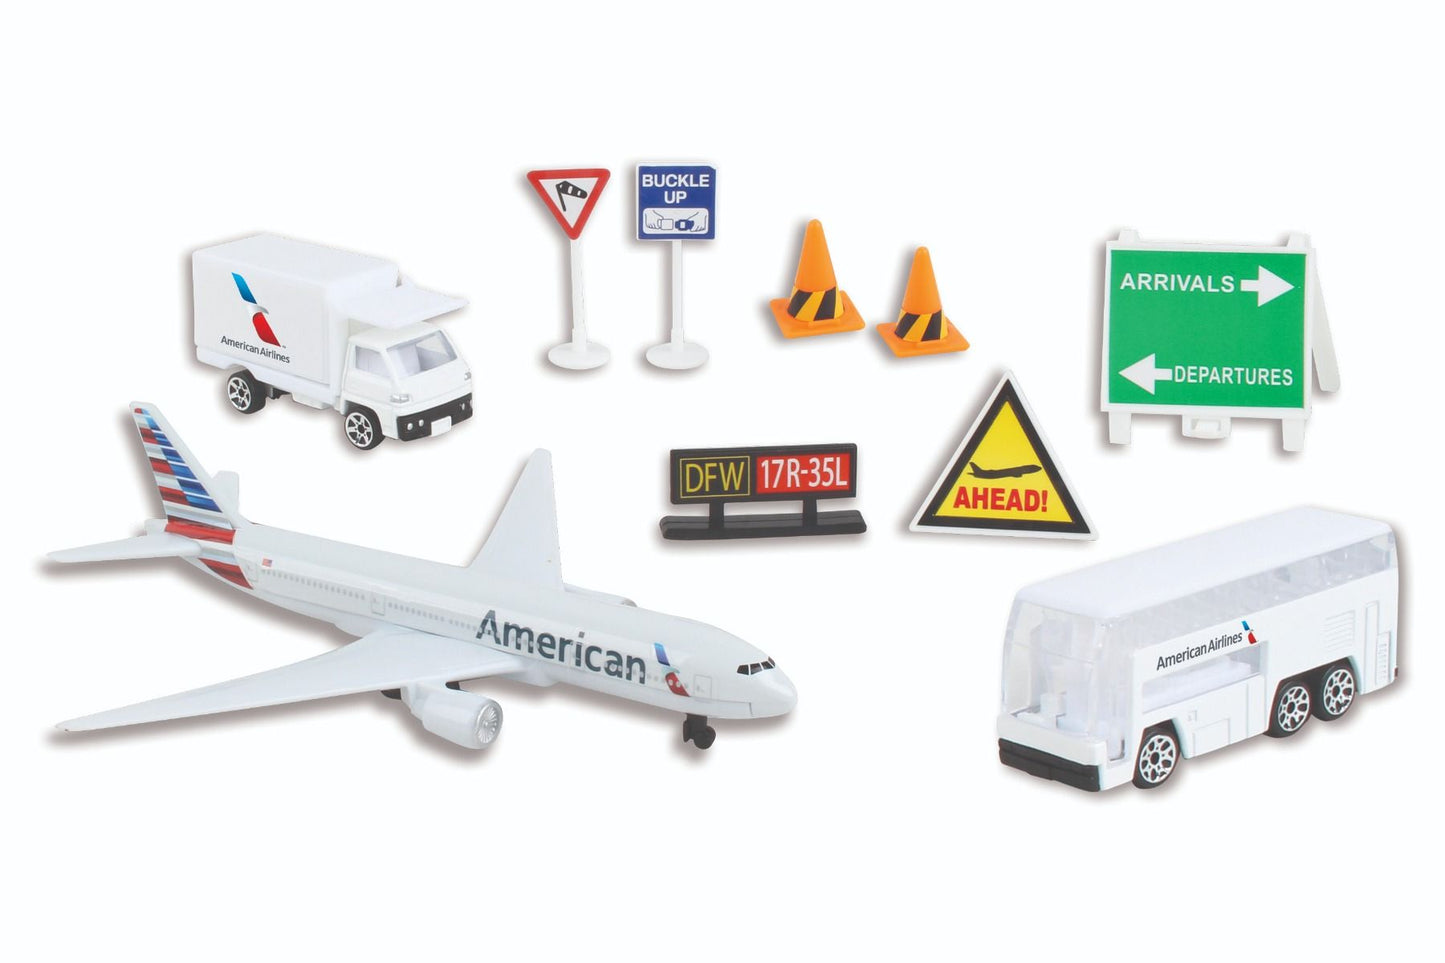 American Airlines 10 Pieces Playset - Die Cast Airplanes, Vehicles Playset - Great Gift For Children & Adult